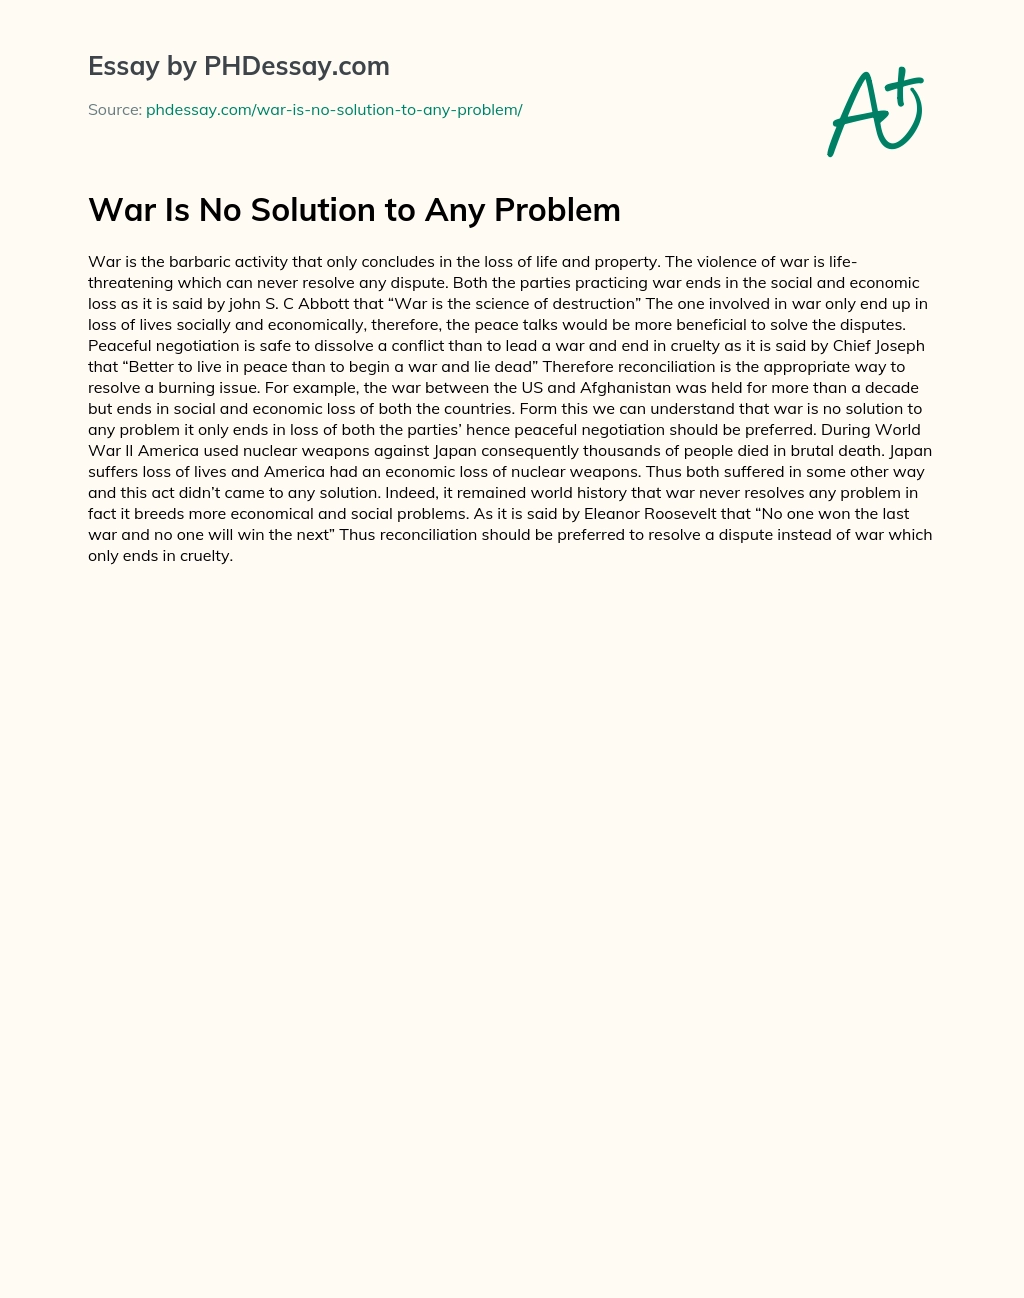 War Is No Solution to Any Problem essay